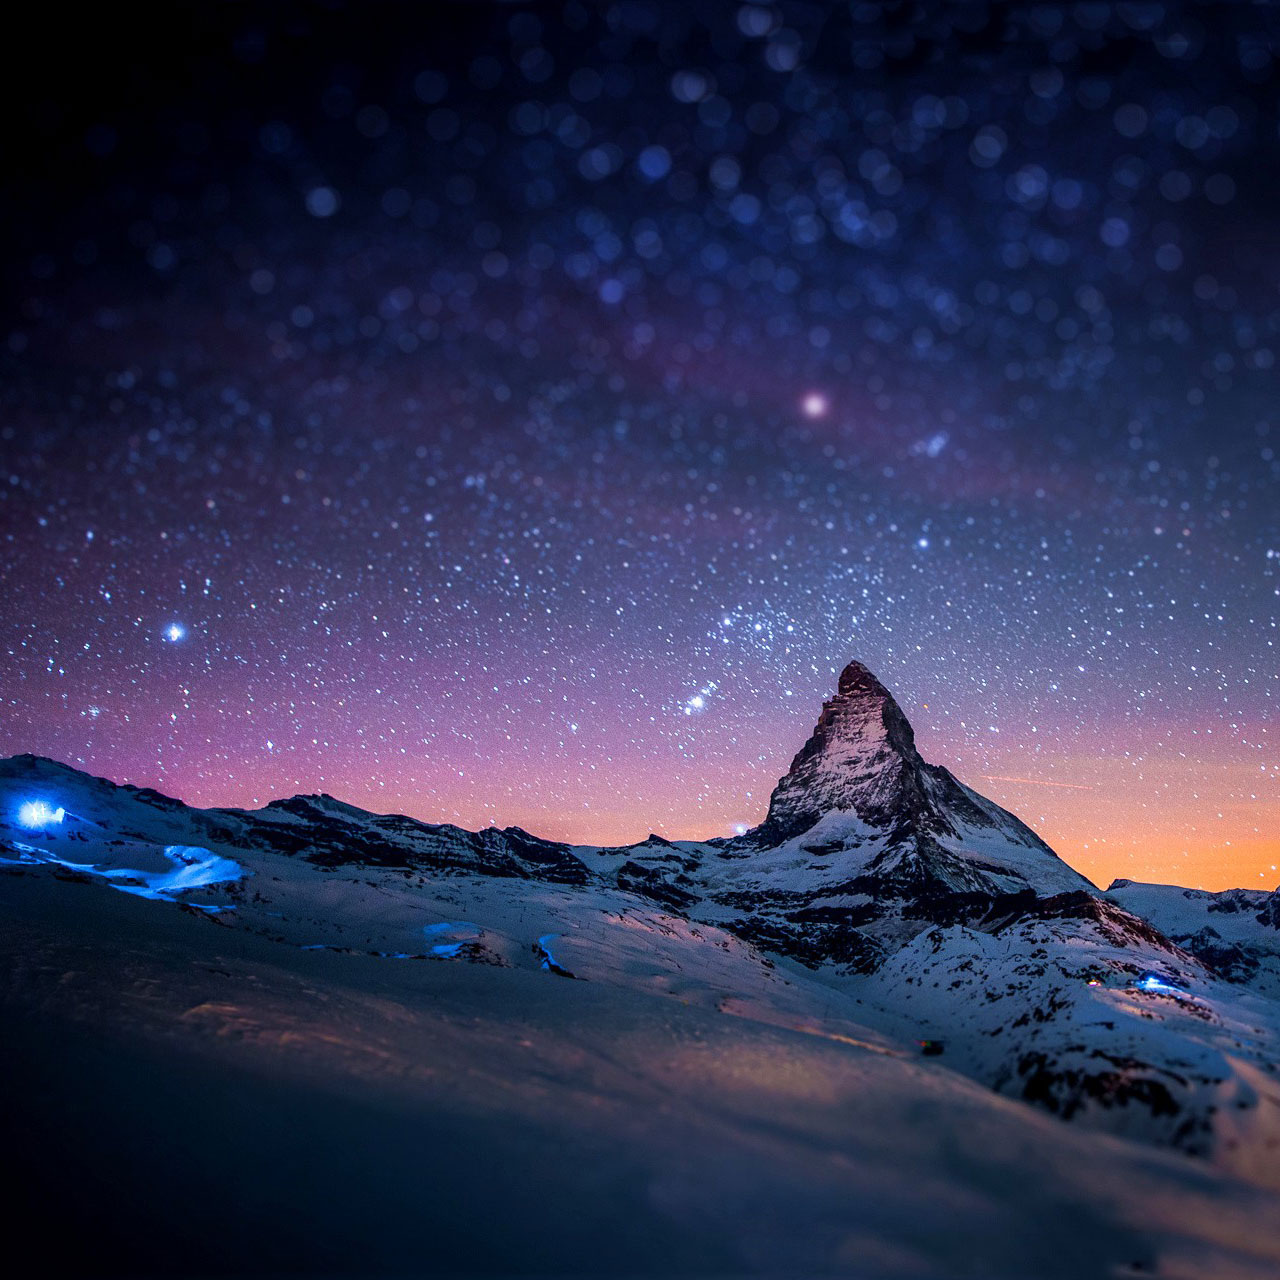 Stars And Snow Night In The Alps Samsung Galaxy Tab 10 wallpapers ...